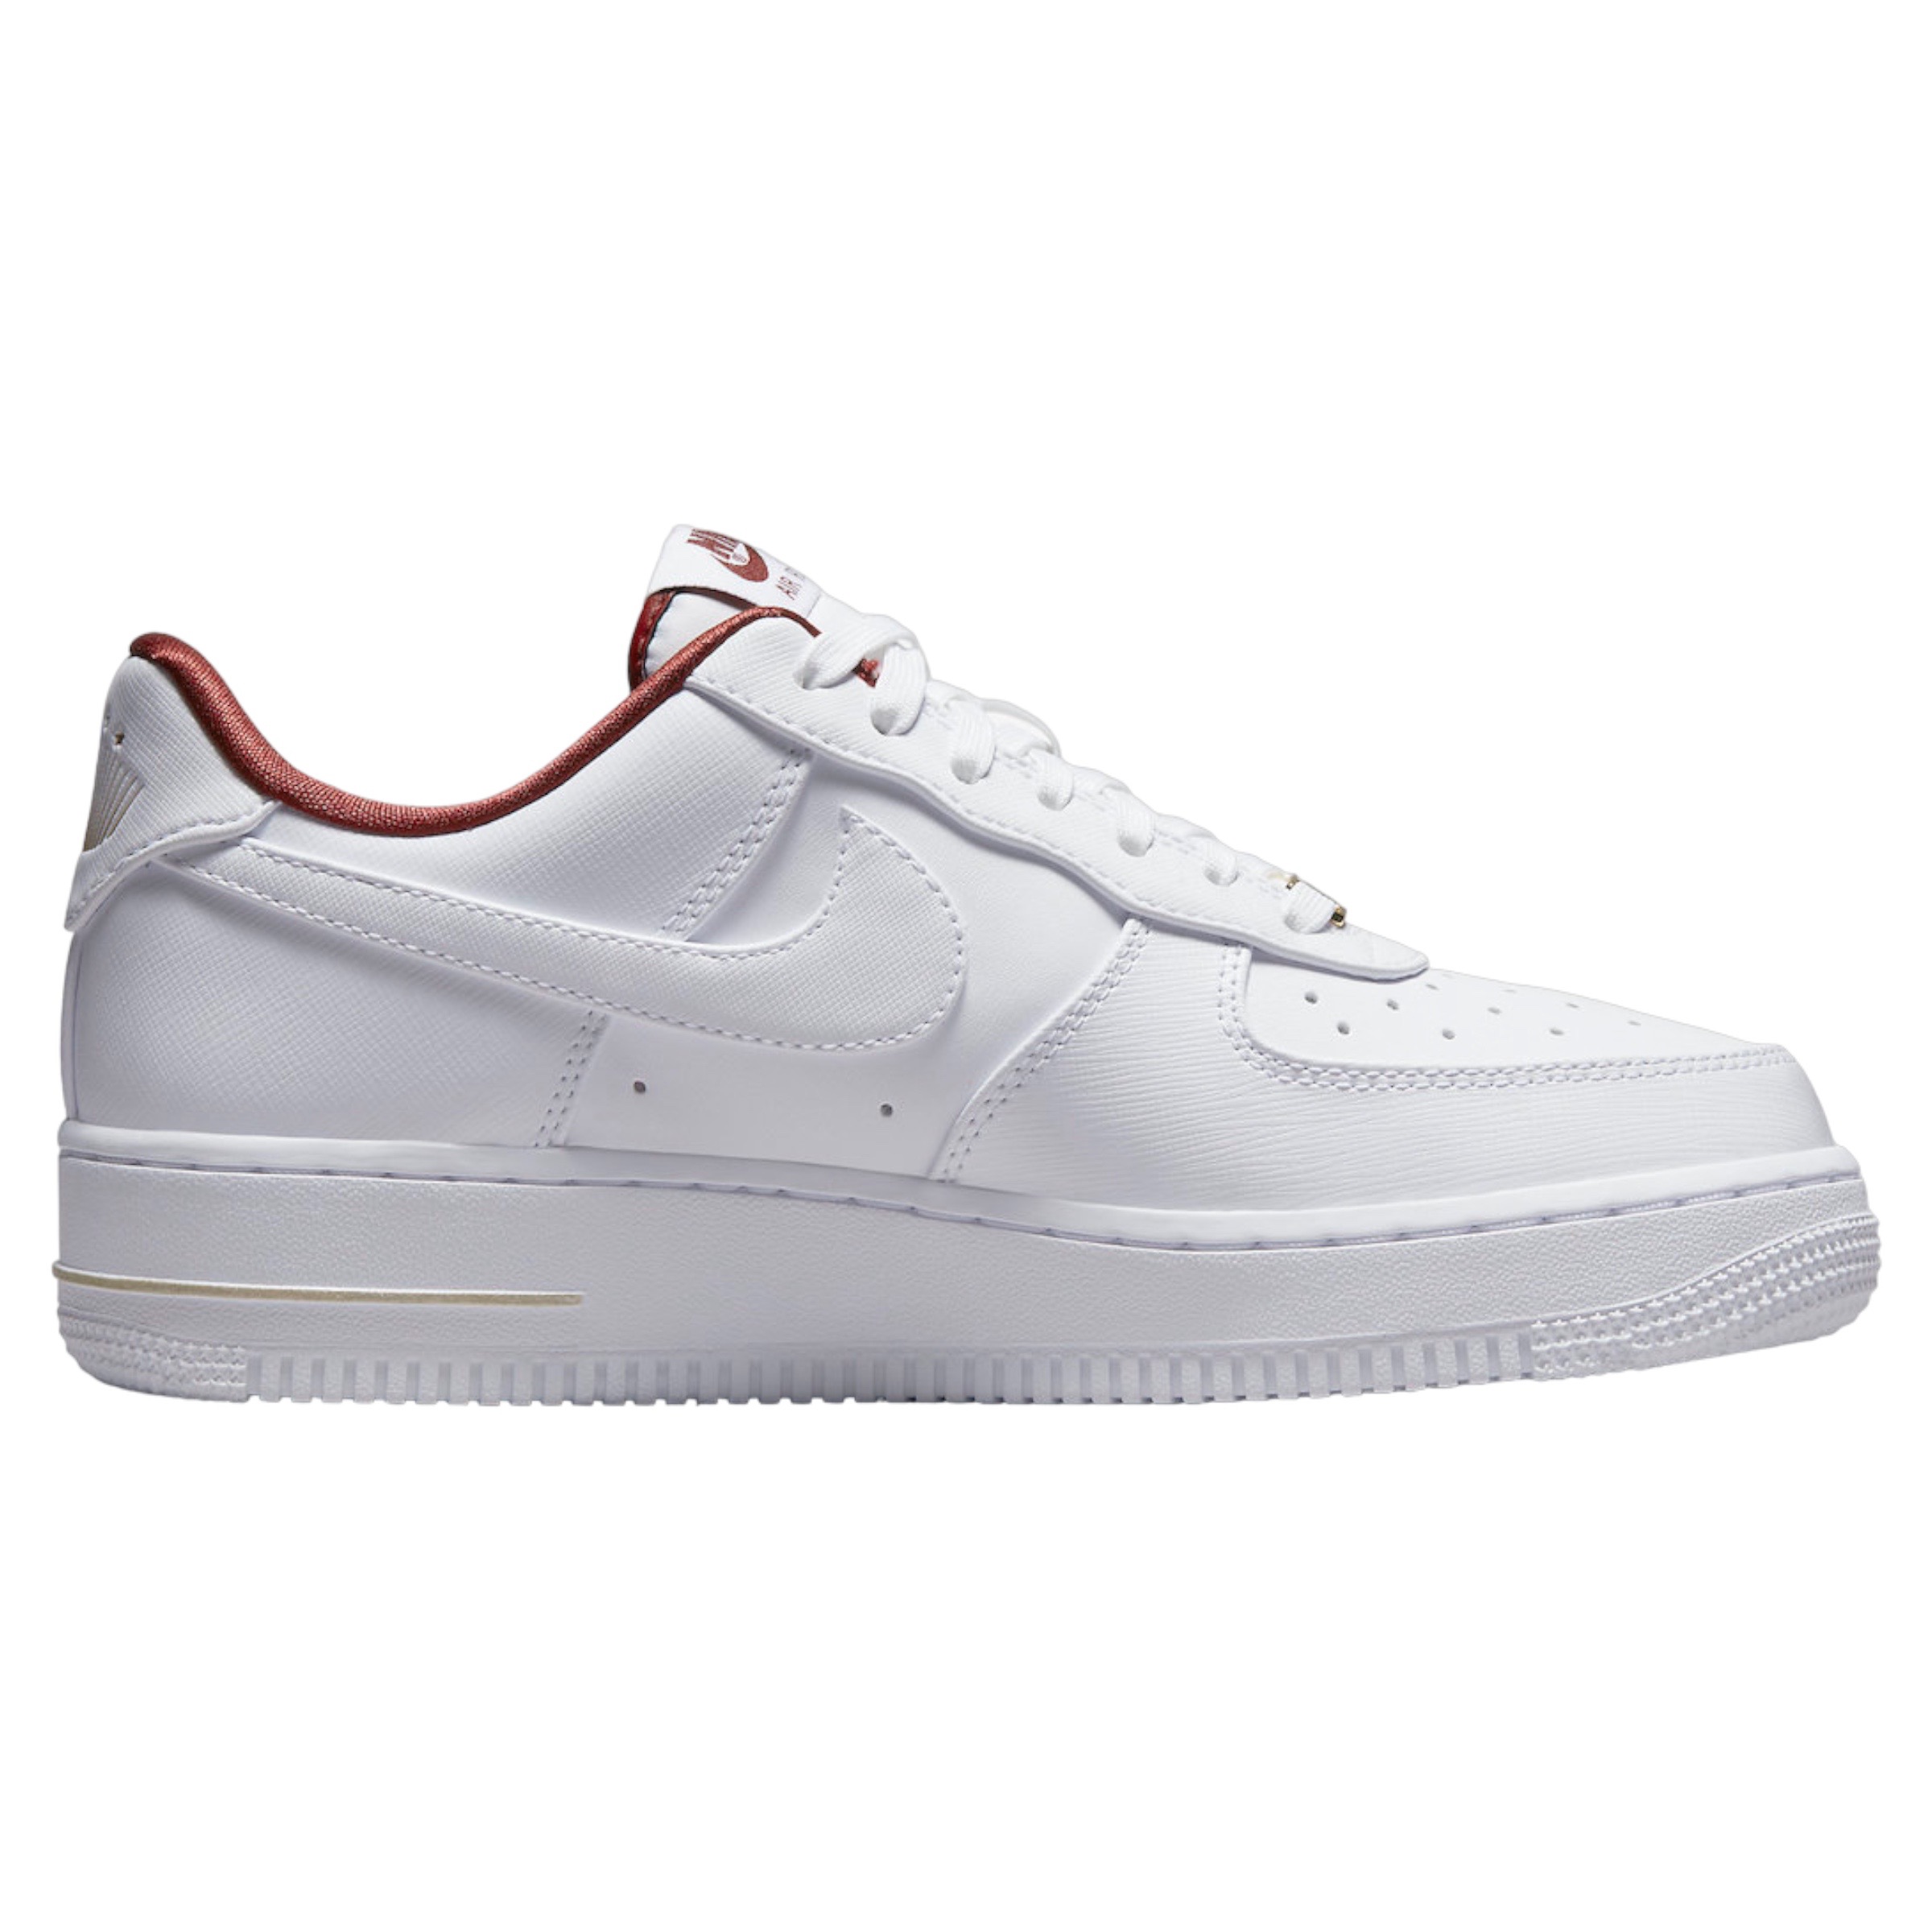 Nike Air Force 1 Low Just Do It Summit White Team Red